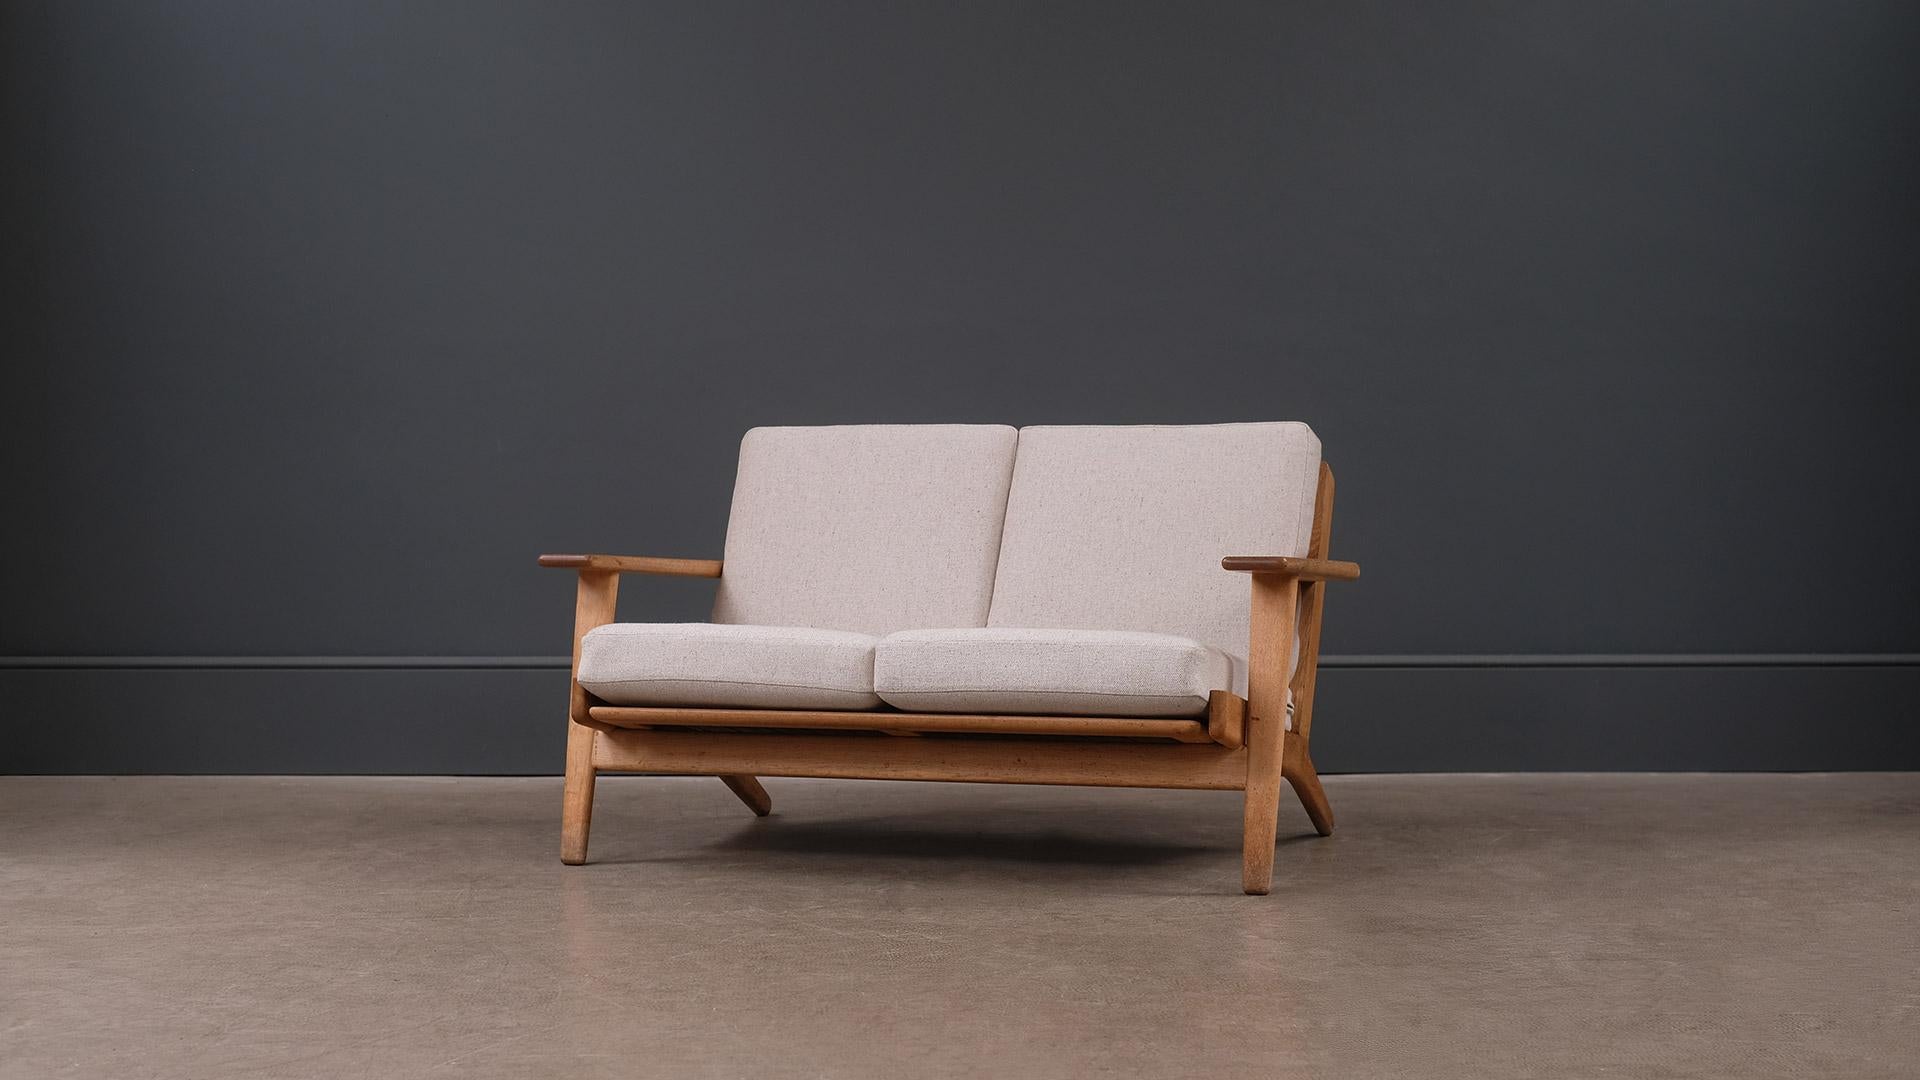 Classic two-seat sofa model GE290 designed by Hans Wegner for GETAMA, Denmark. Solid oak frame with fully reconditioned and reupholstered original sprung cushions.